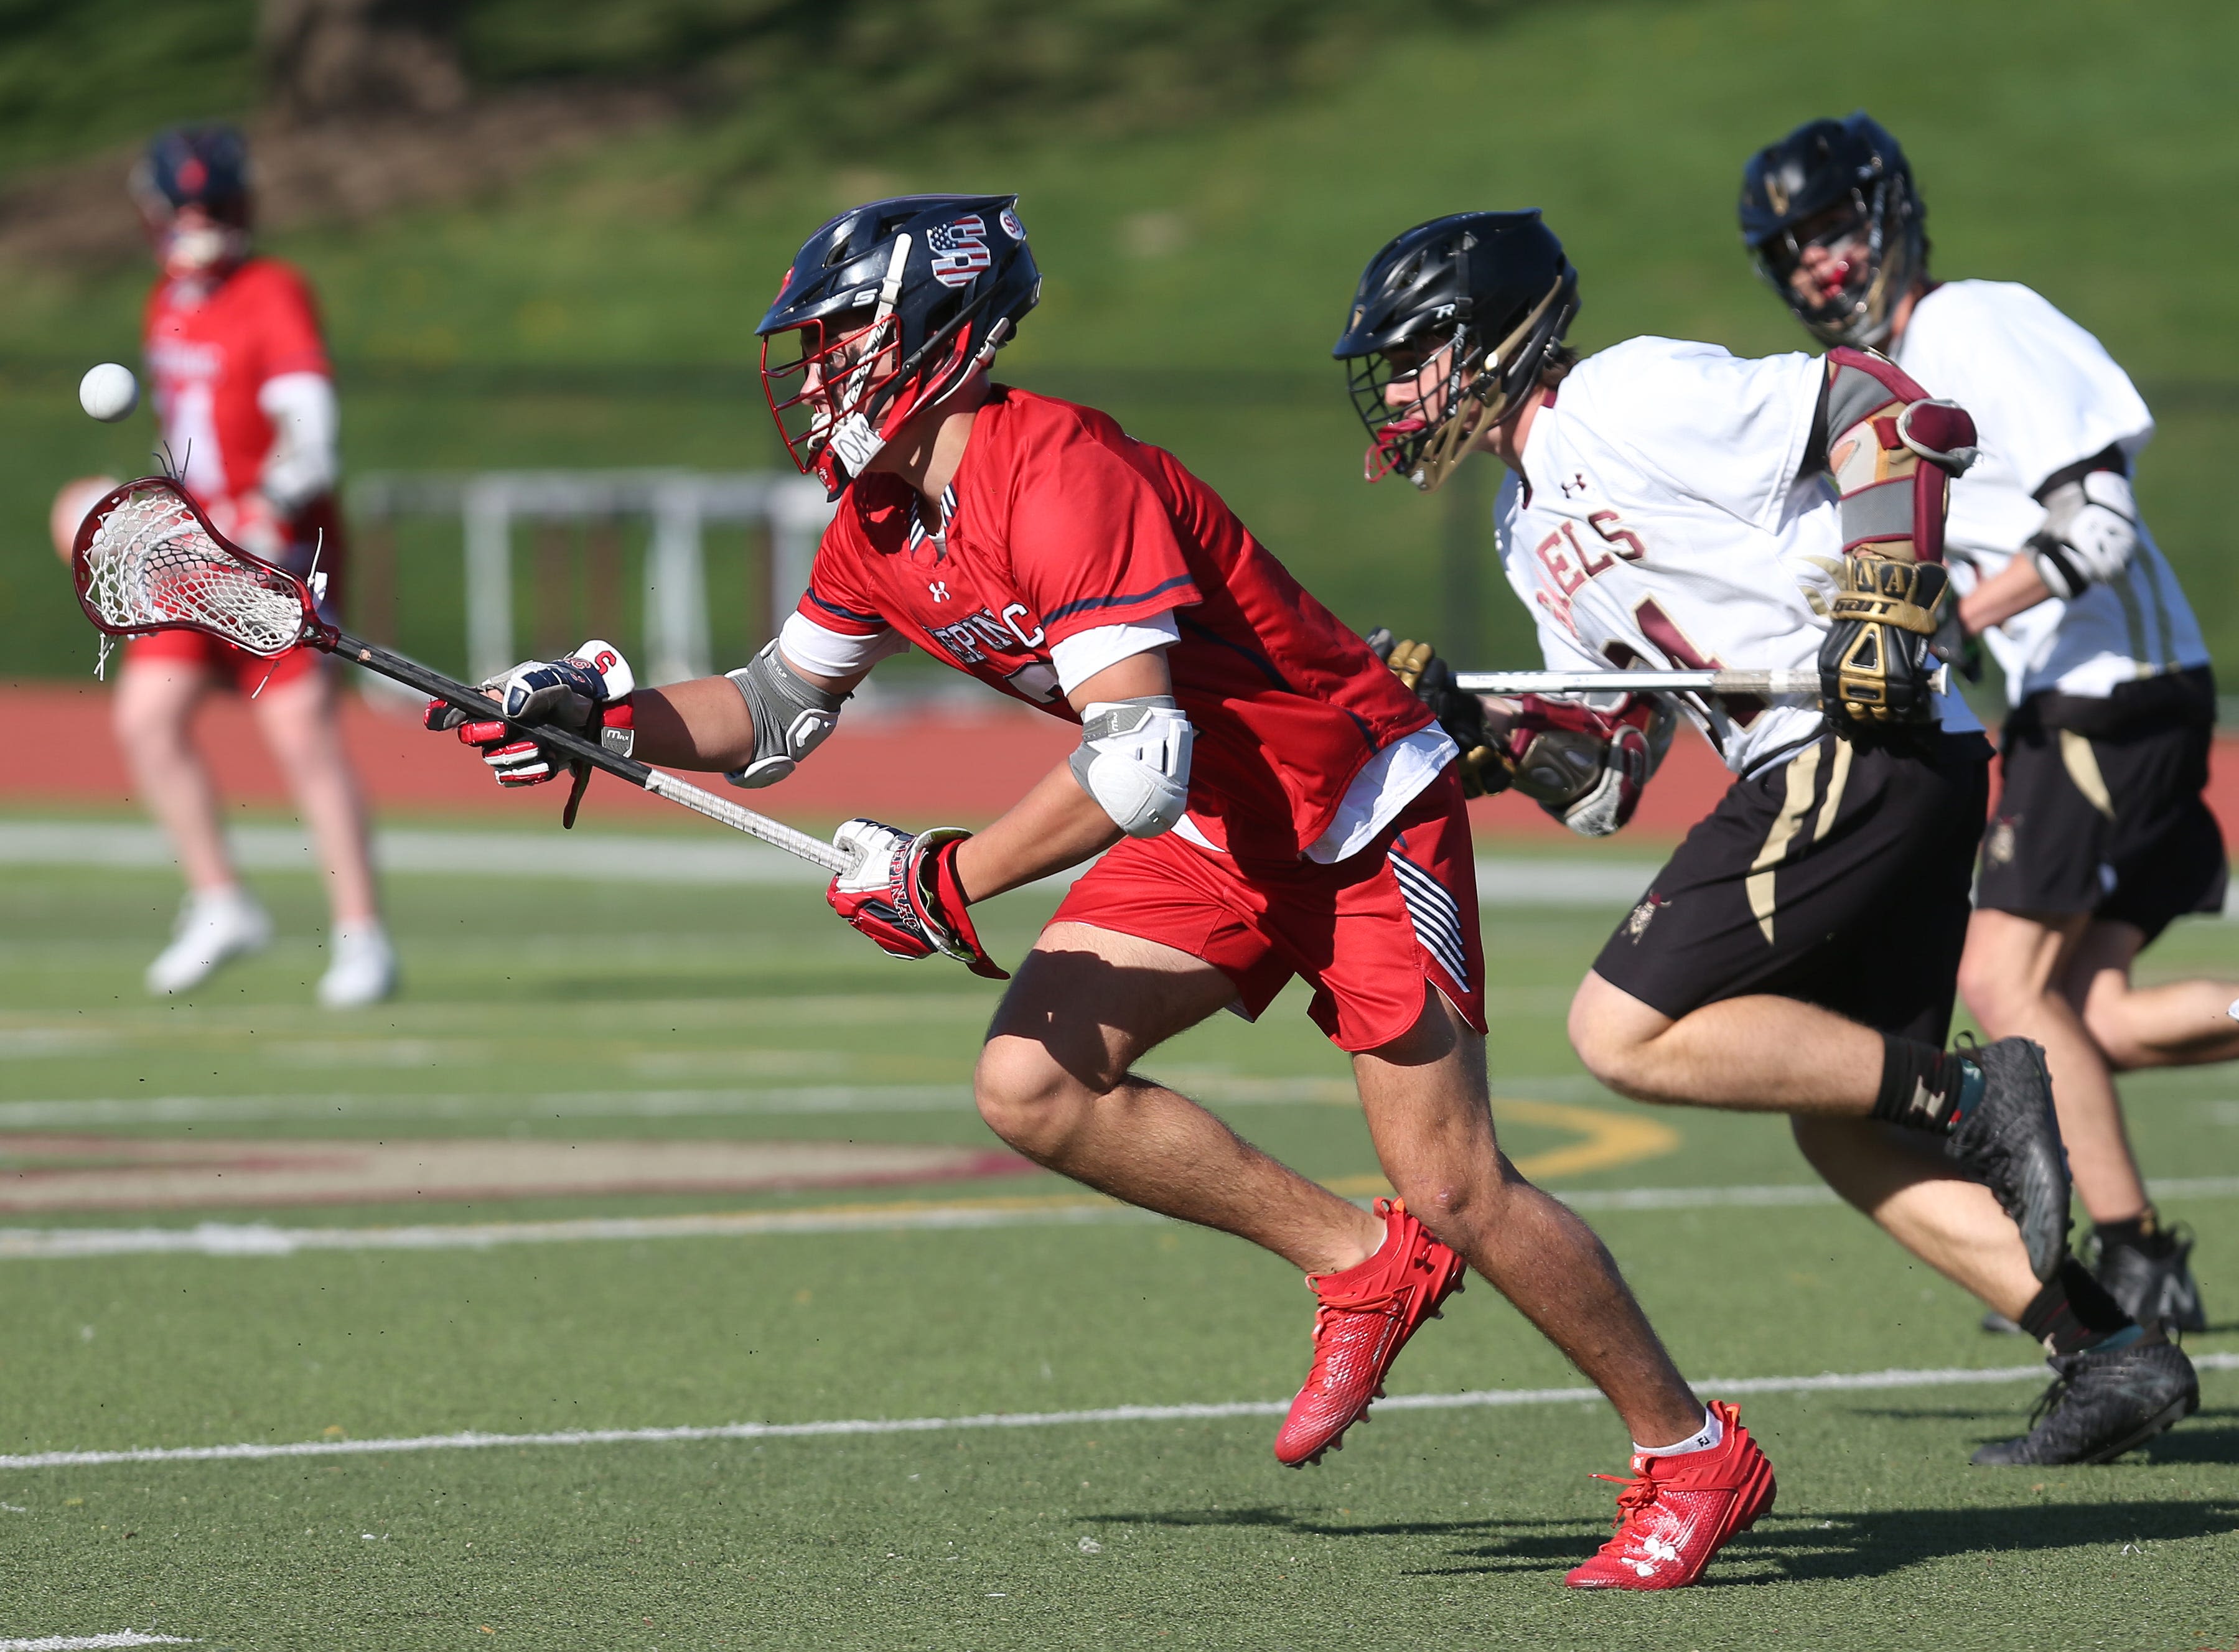 You make the call: Who is the lohud Boys Lacrosse Player of the Week?